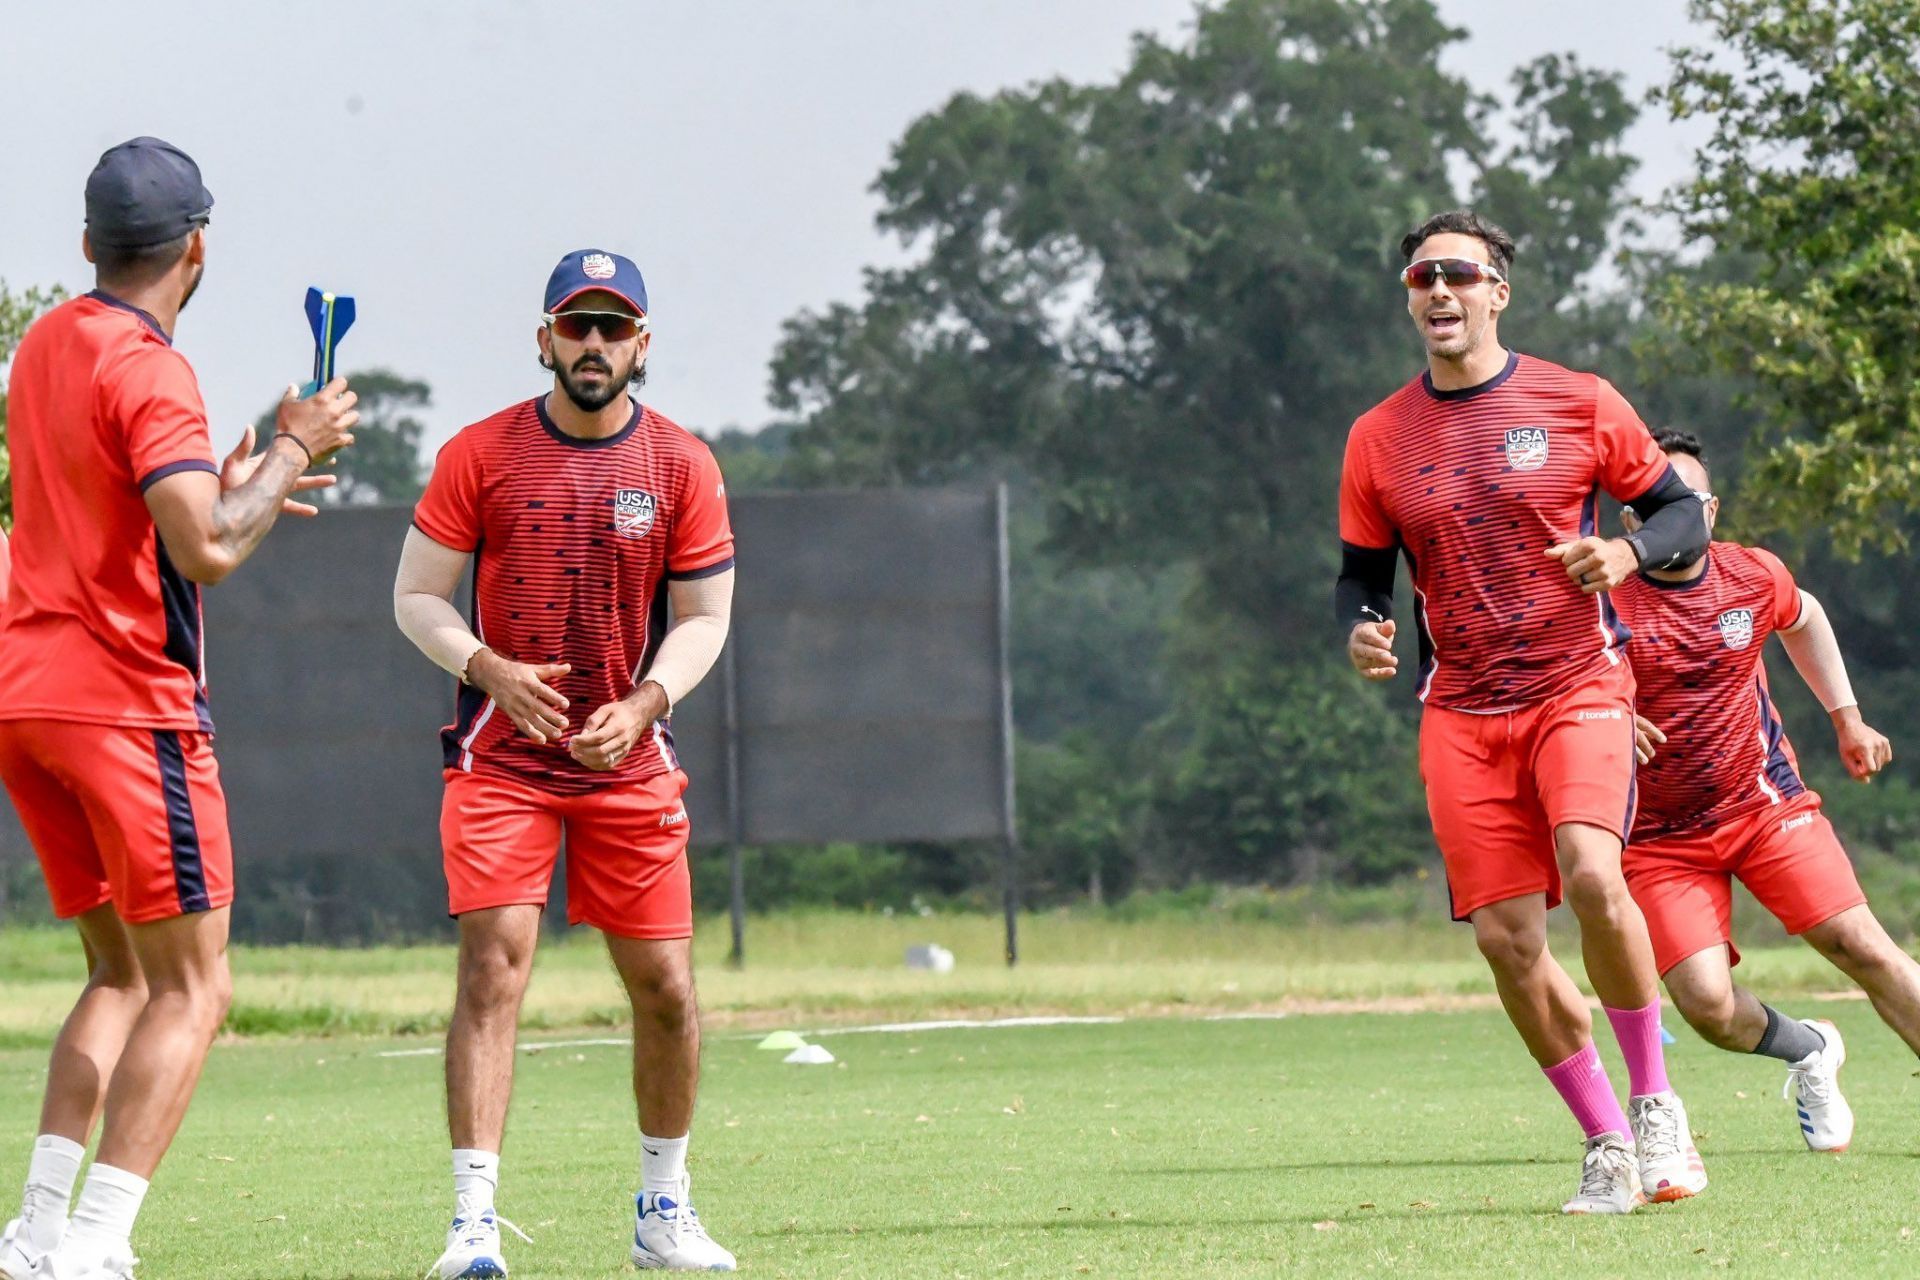 USA players during the practice session (Image Courtesy: X/USA Cricket)